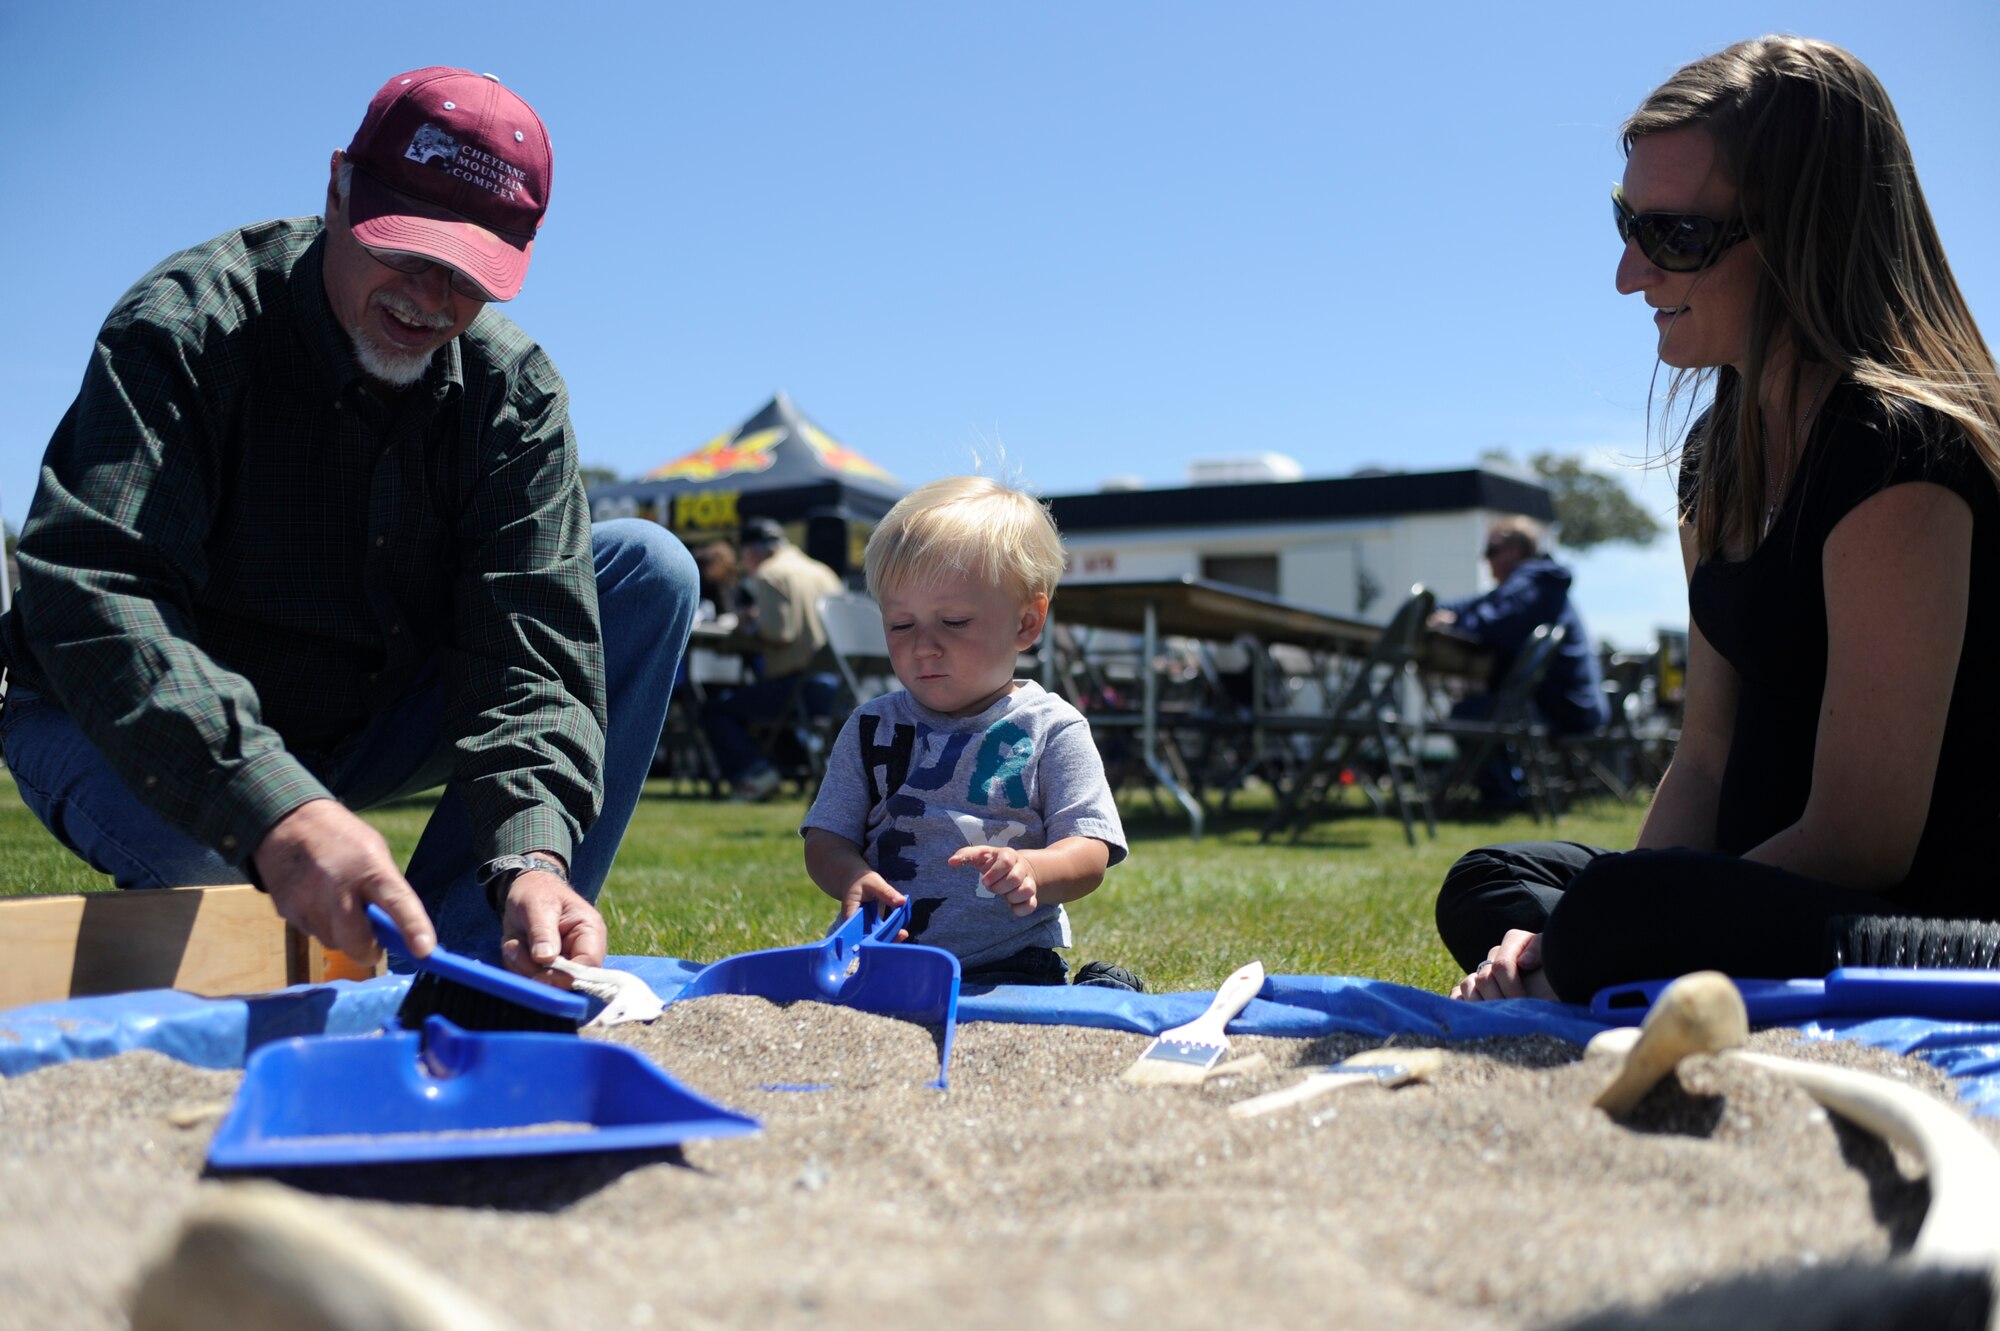 VANDENBERG AIR FORCE BASE, Calif. --Bob Peterson, a 30th Civil Engineer Squadron archaeologist, shows Jackson and Heather Smith, Air Force dependents, how he digs for artifacts on base during an Earth Day event here Wednesday, April 18, 2012. More than 25 base and local organizations participated in this environmental awareness campaign. (U.S. Air Force photo/Staff Sgt. Andrew Satran) 

 

 